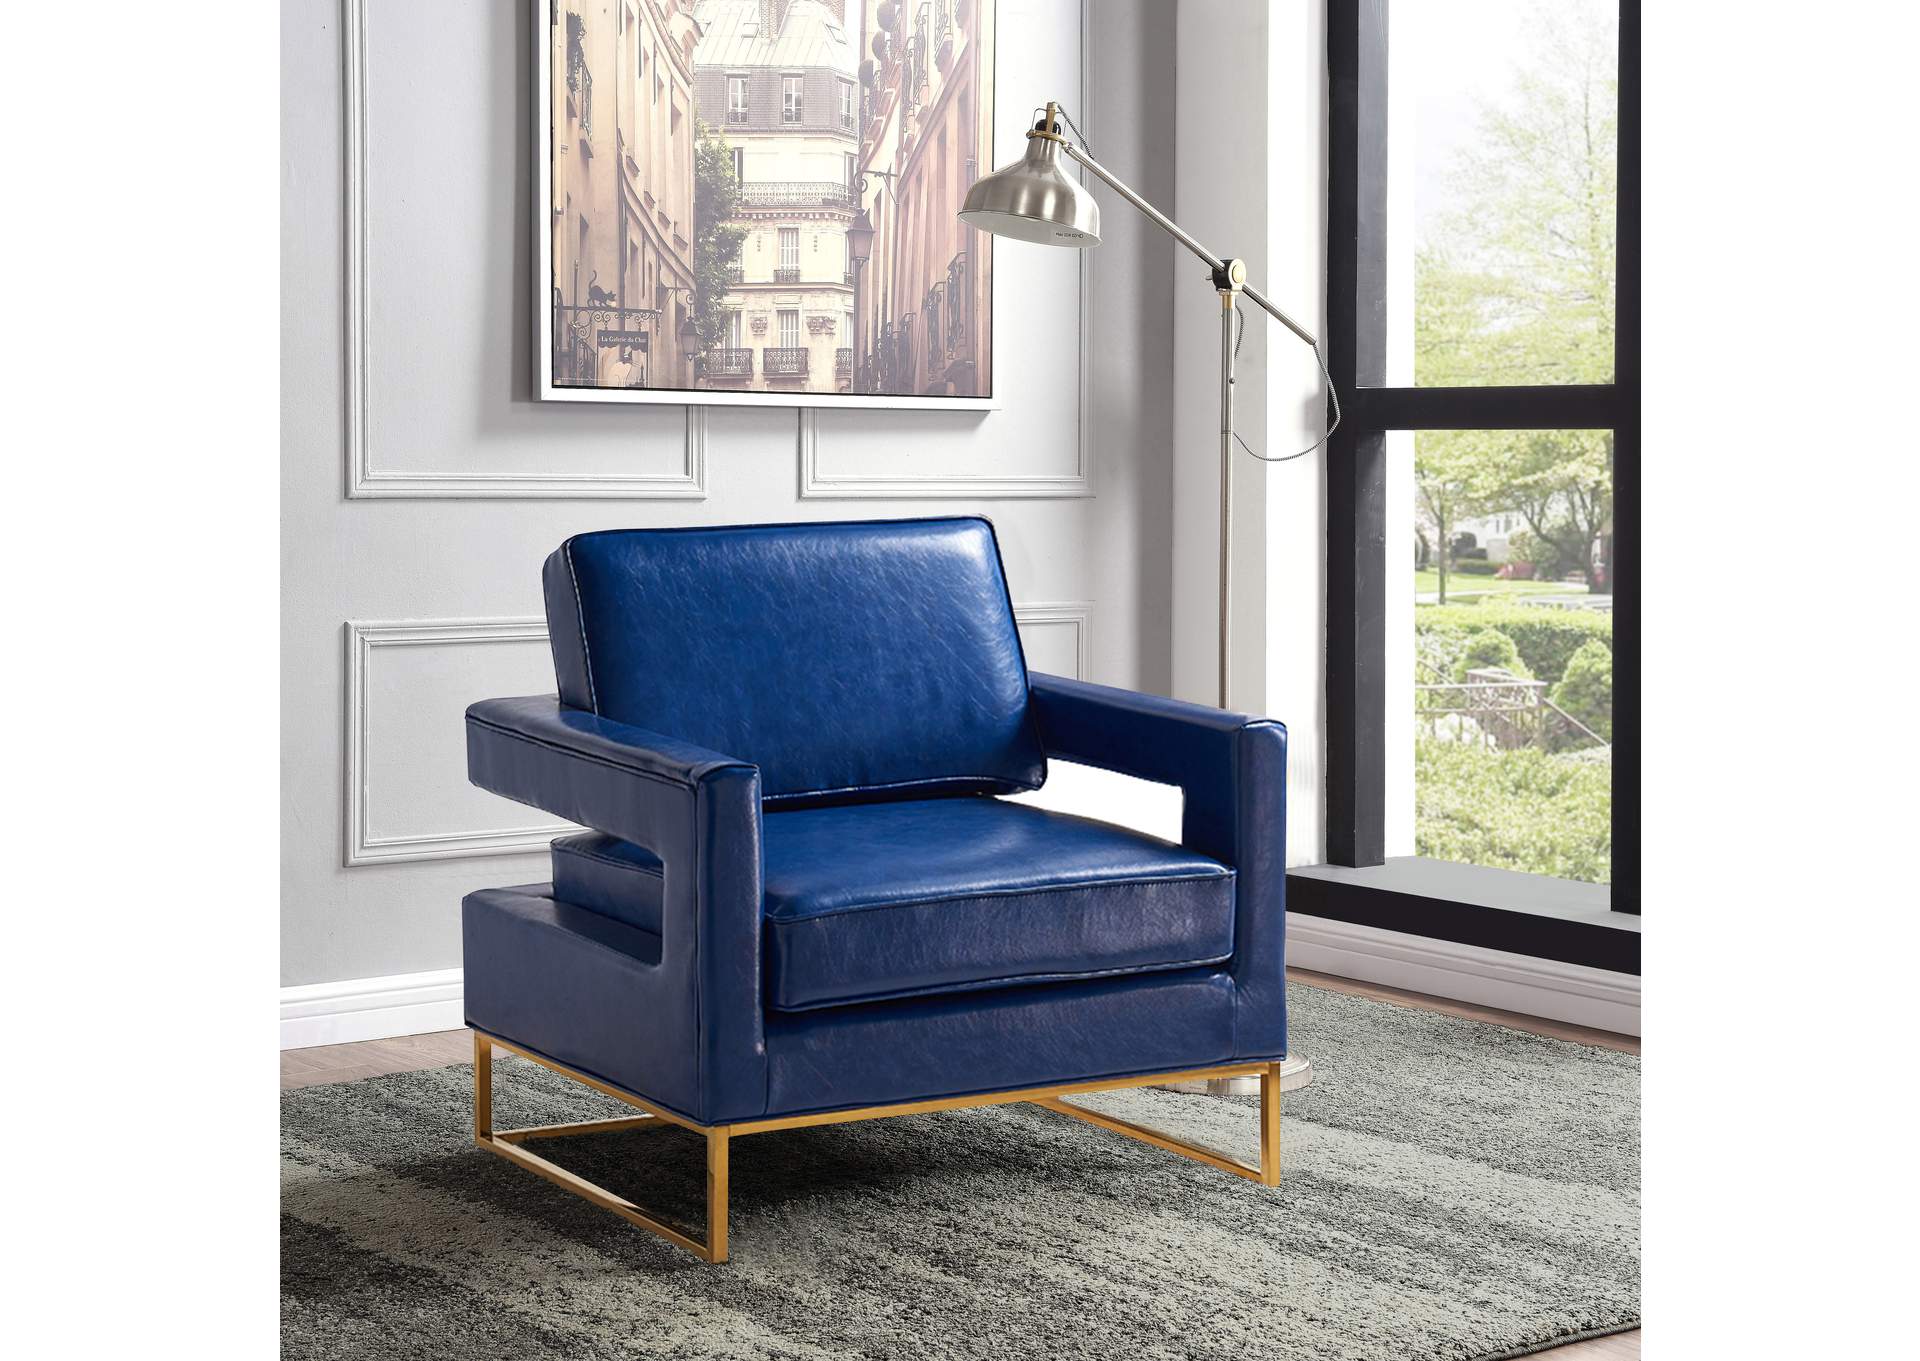 Amelia Navy Faux Leather Accent Chair, Navy Blue Faux Leather Accent Chair